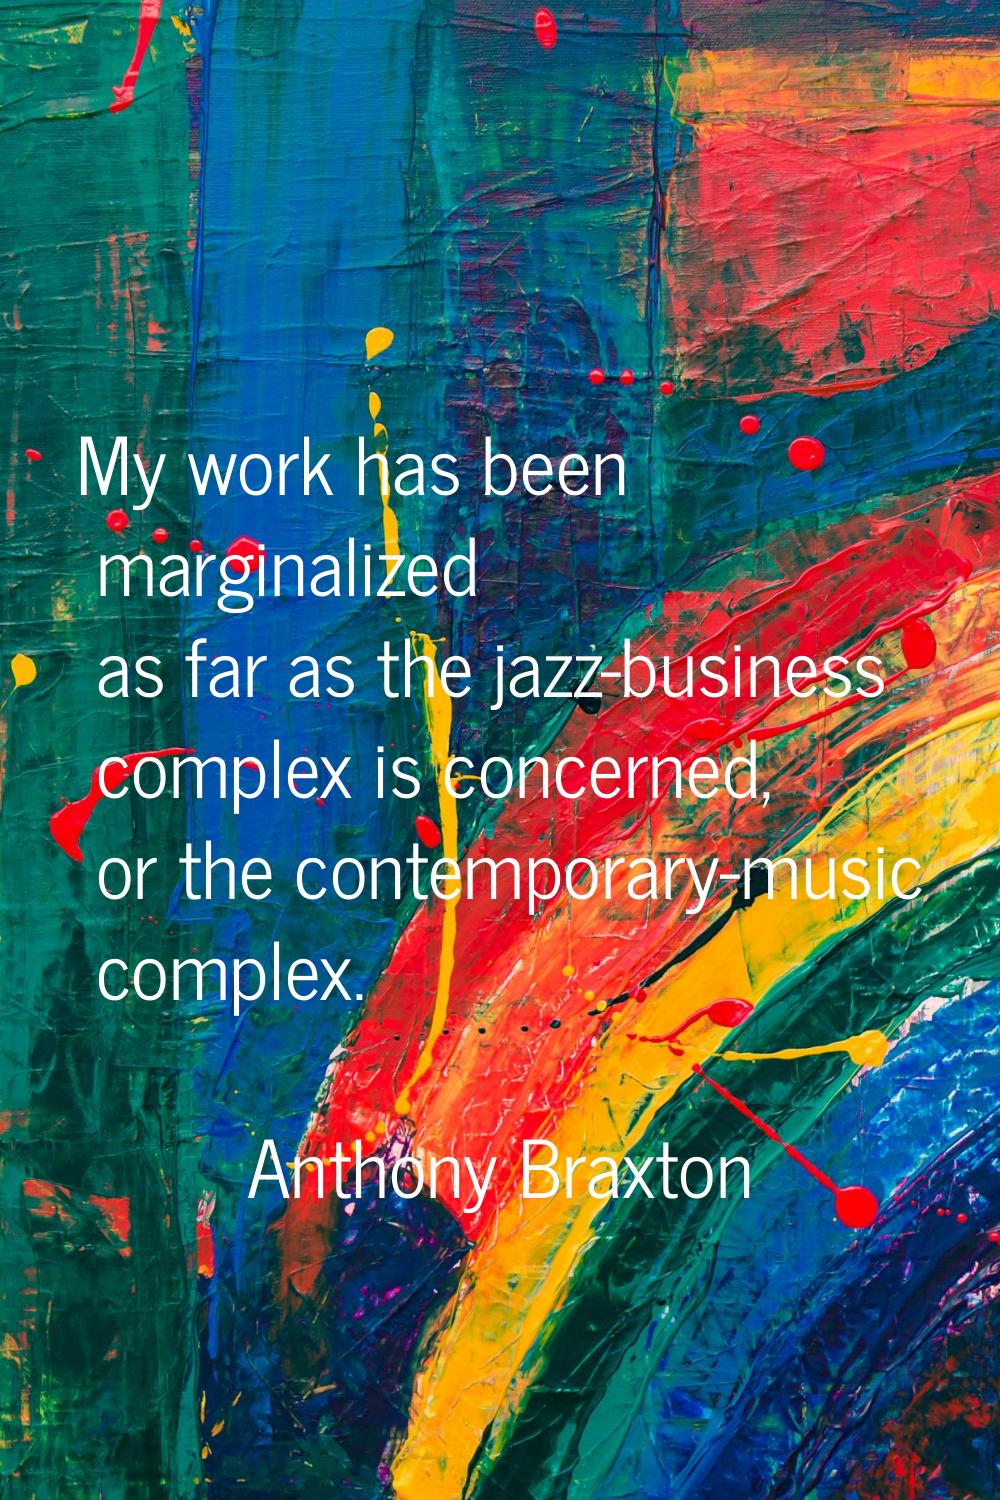 My work has been marginalized as far as the jazz-business complex is concerned, or the contemporary